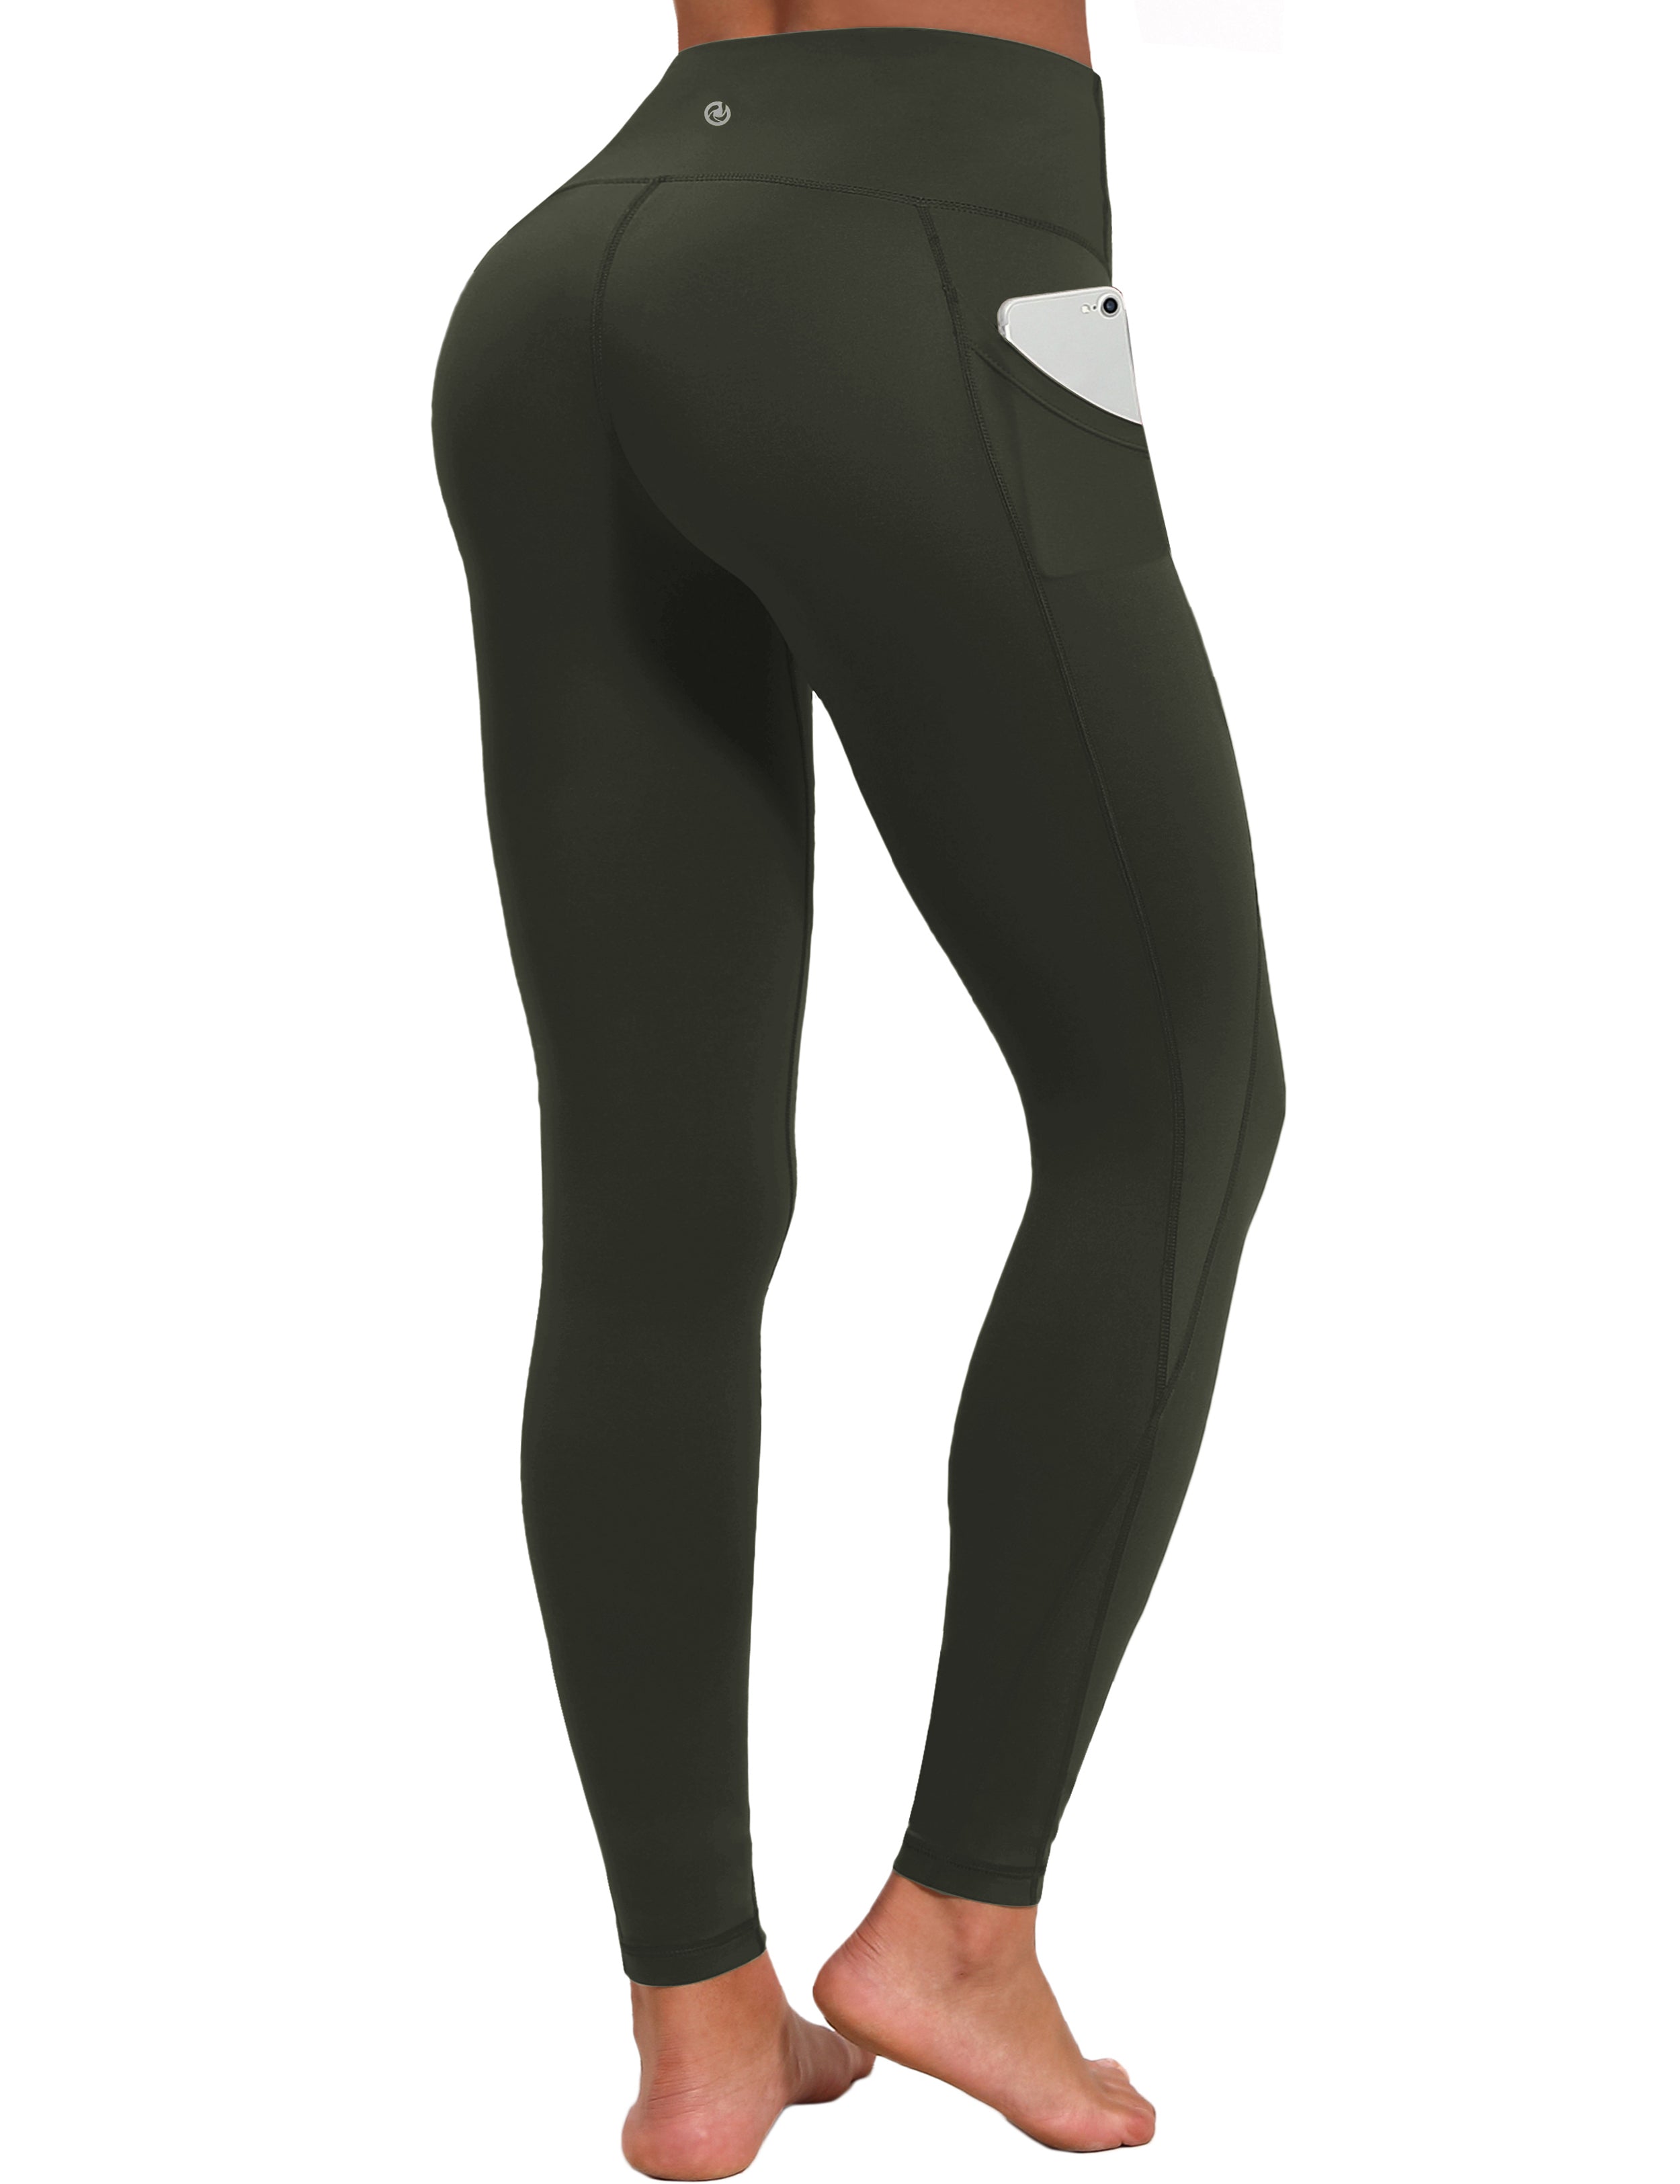 High Waist Side Pockets Jogging Pants olivegray 75% Nylon, 25% Spandex Fabric doesn't attract lint easily 4-way stretch No see-through Moisture-wicking Tummy control Inner pocket